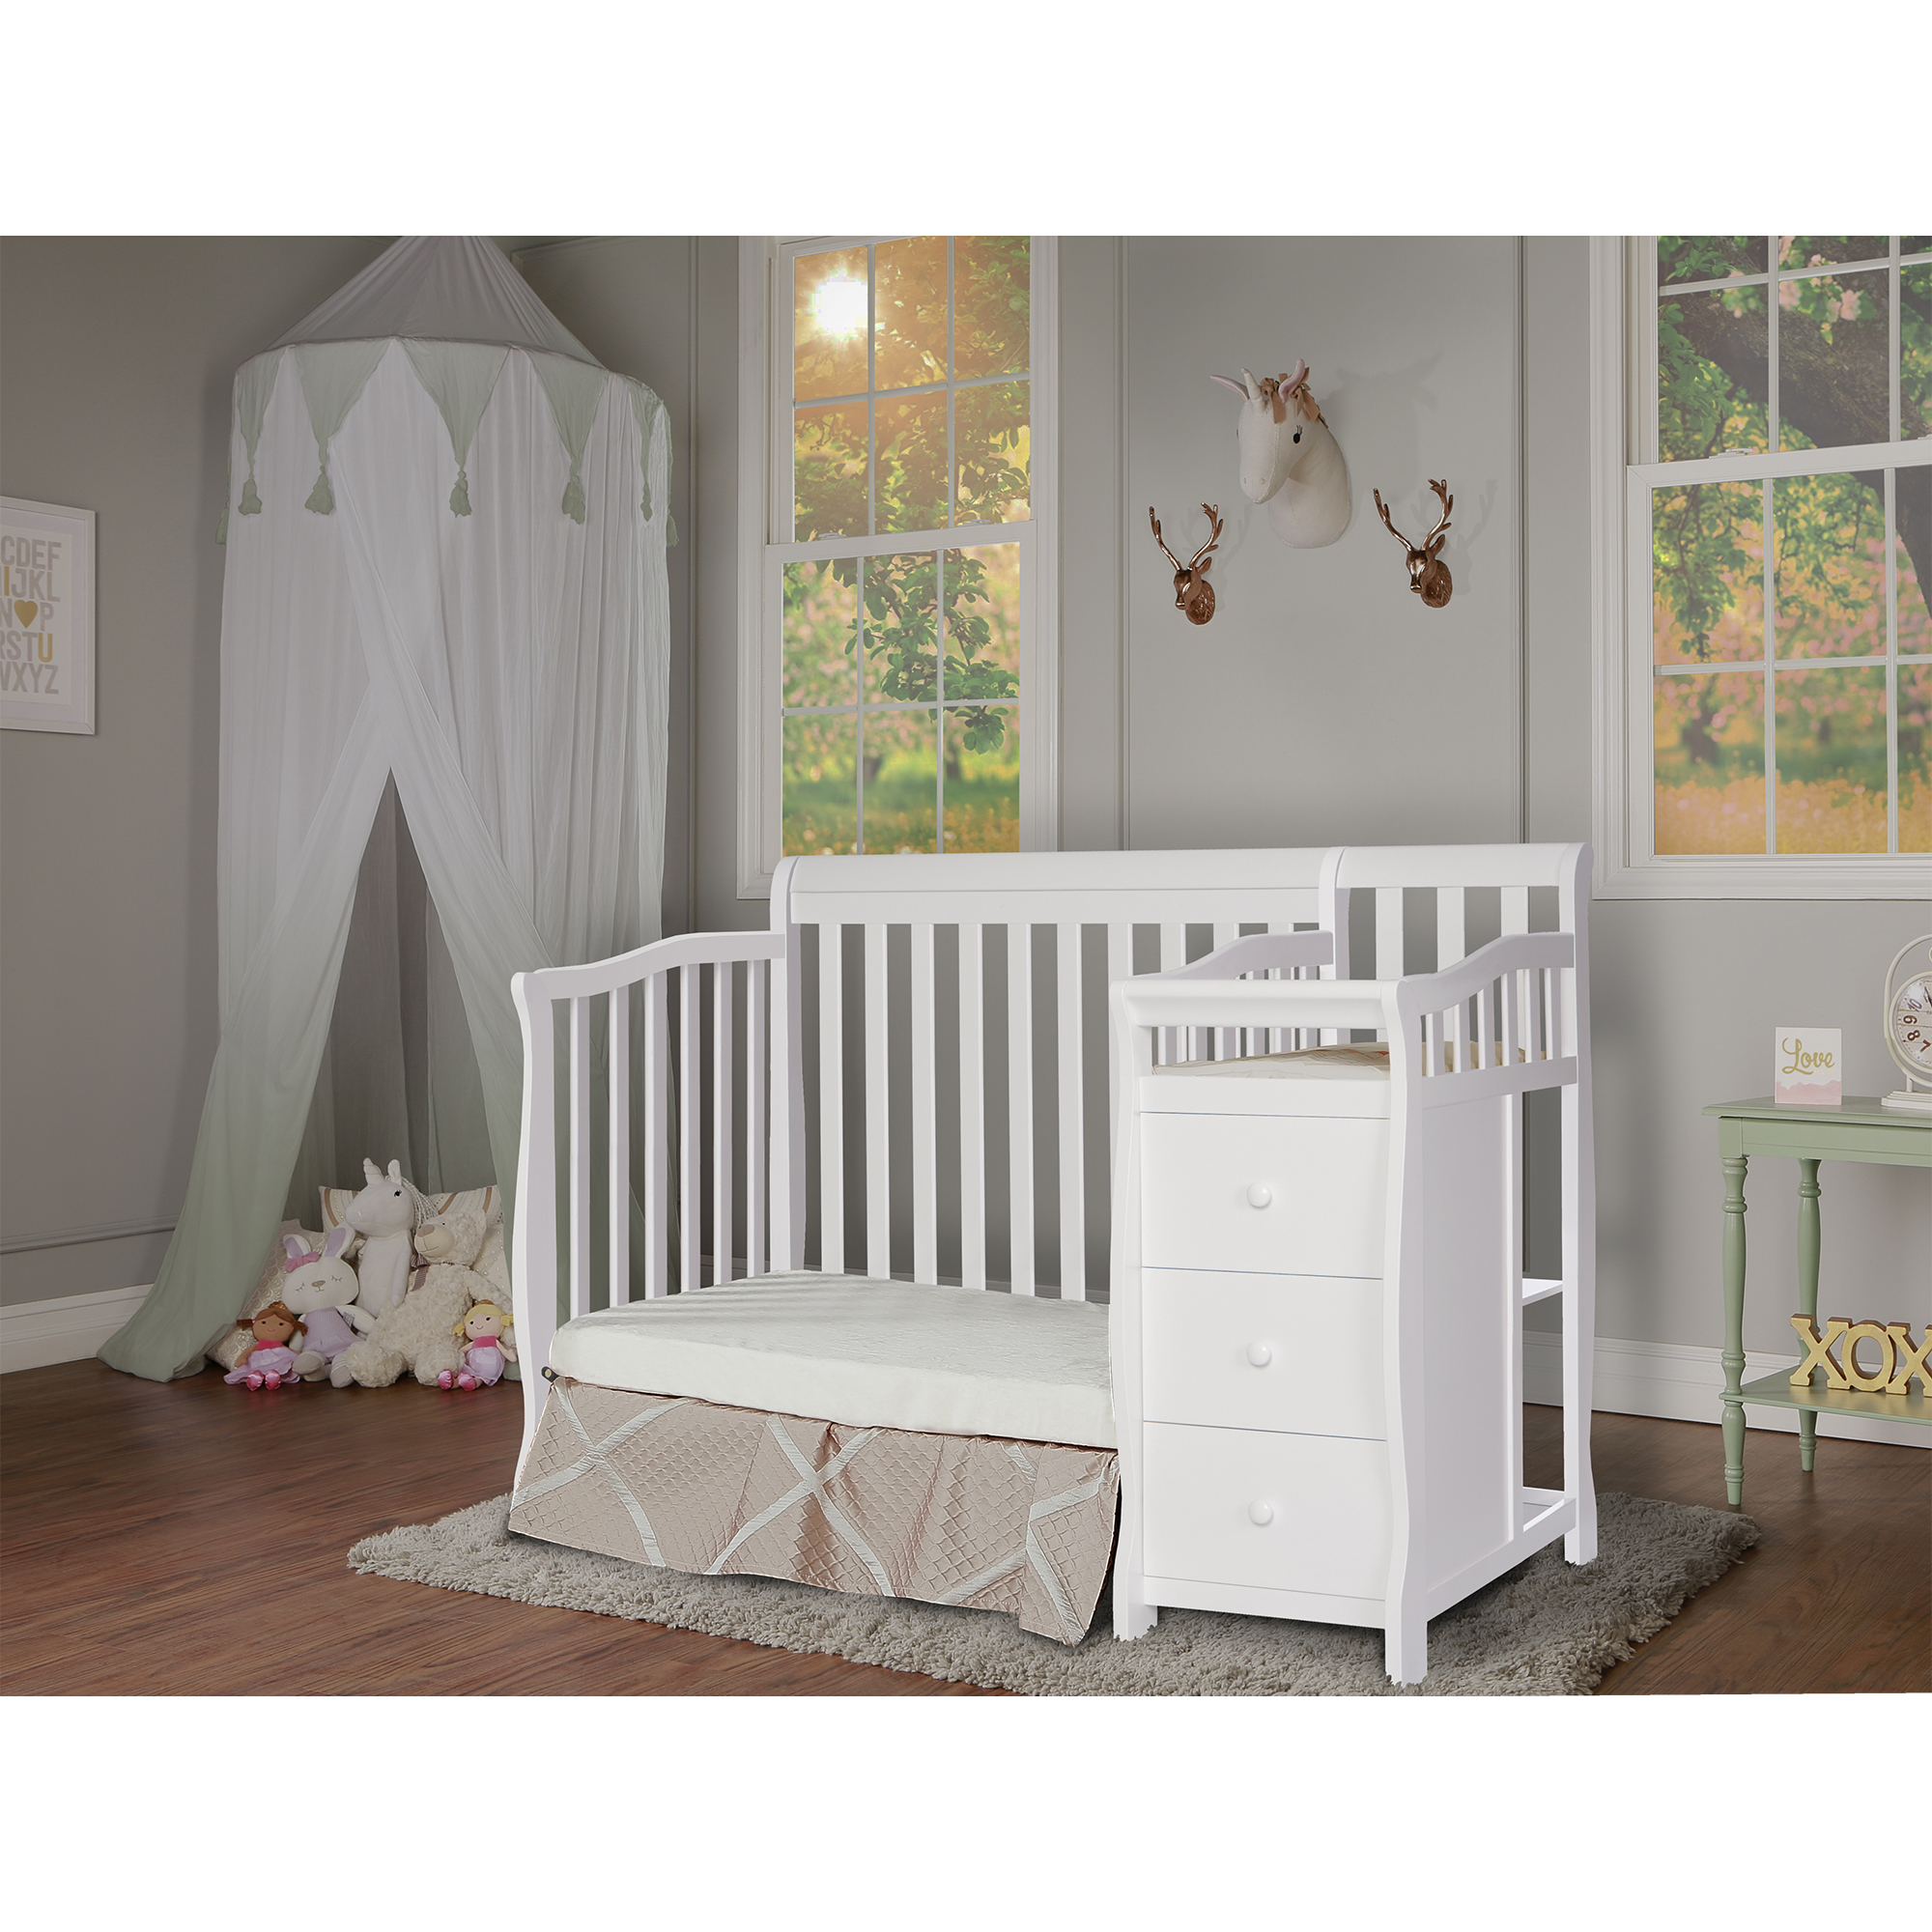 Dream On Me Jayden 4-in-1 Mini Convertible Crib and Changer, White - image 4 of 6